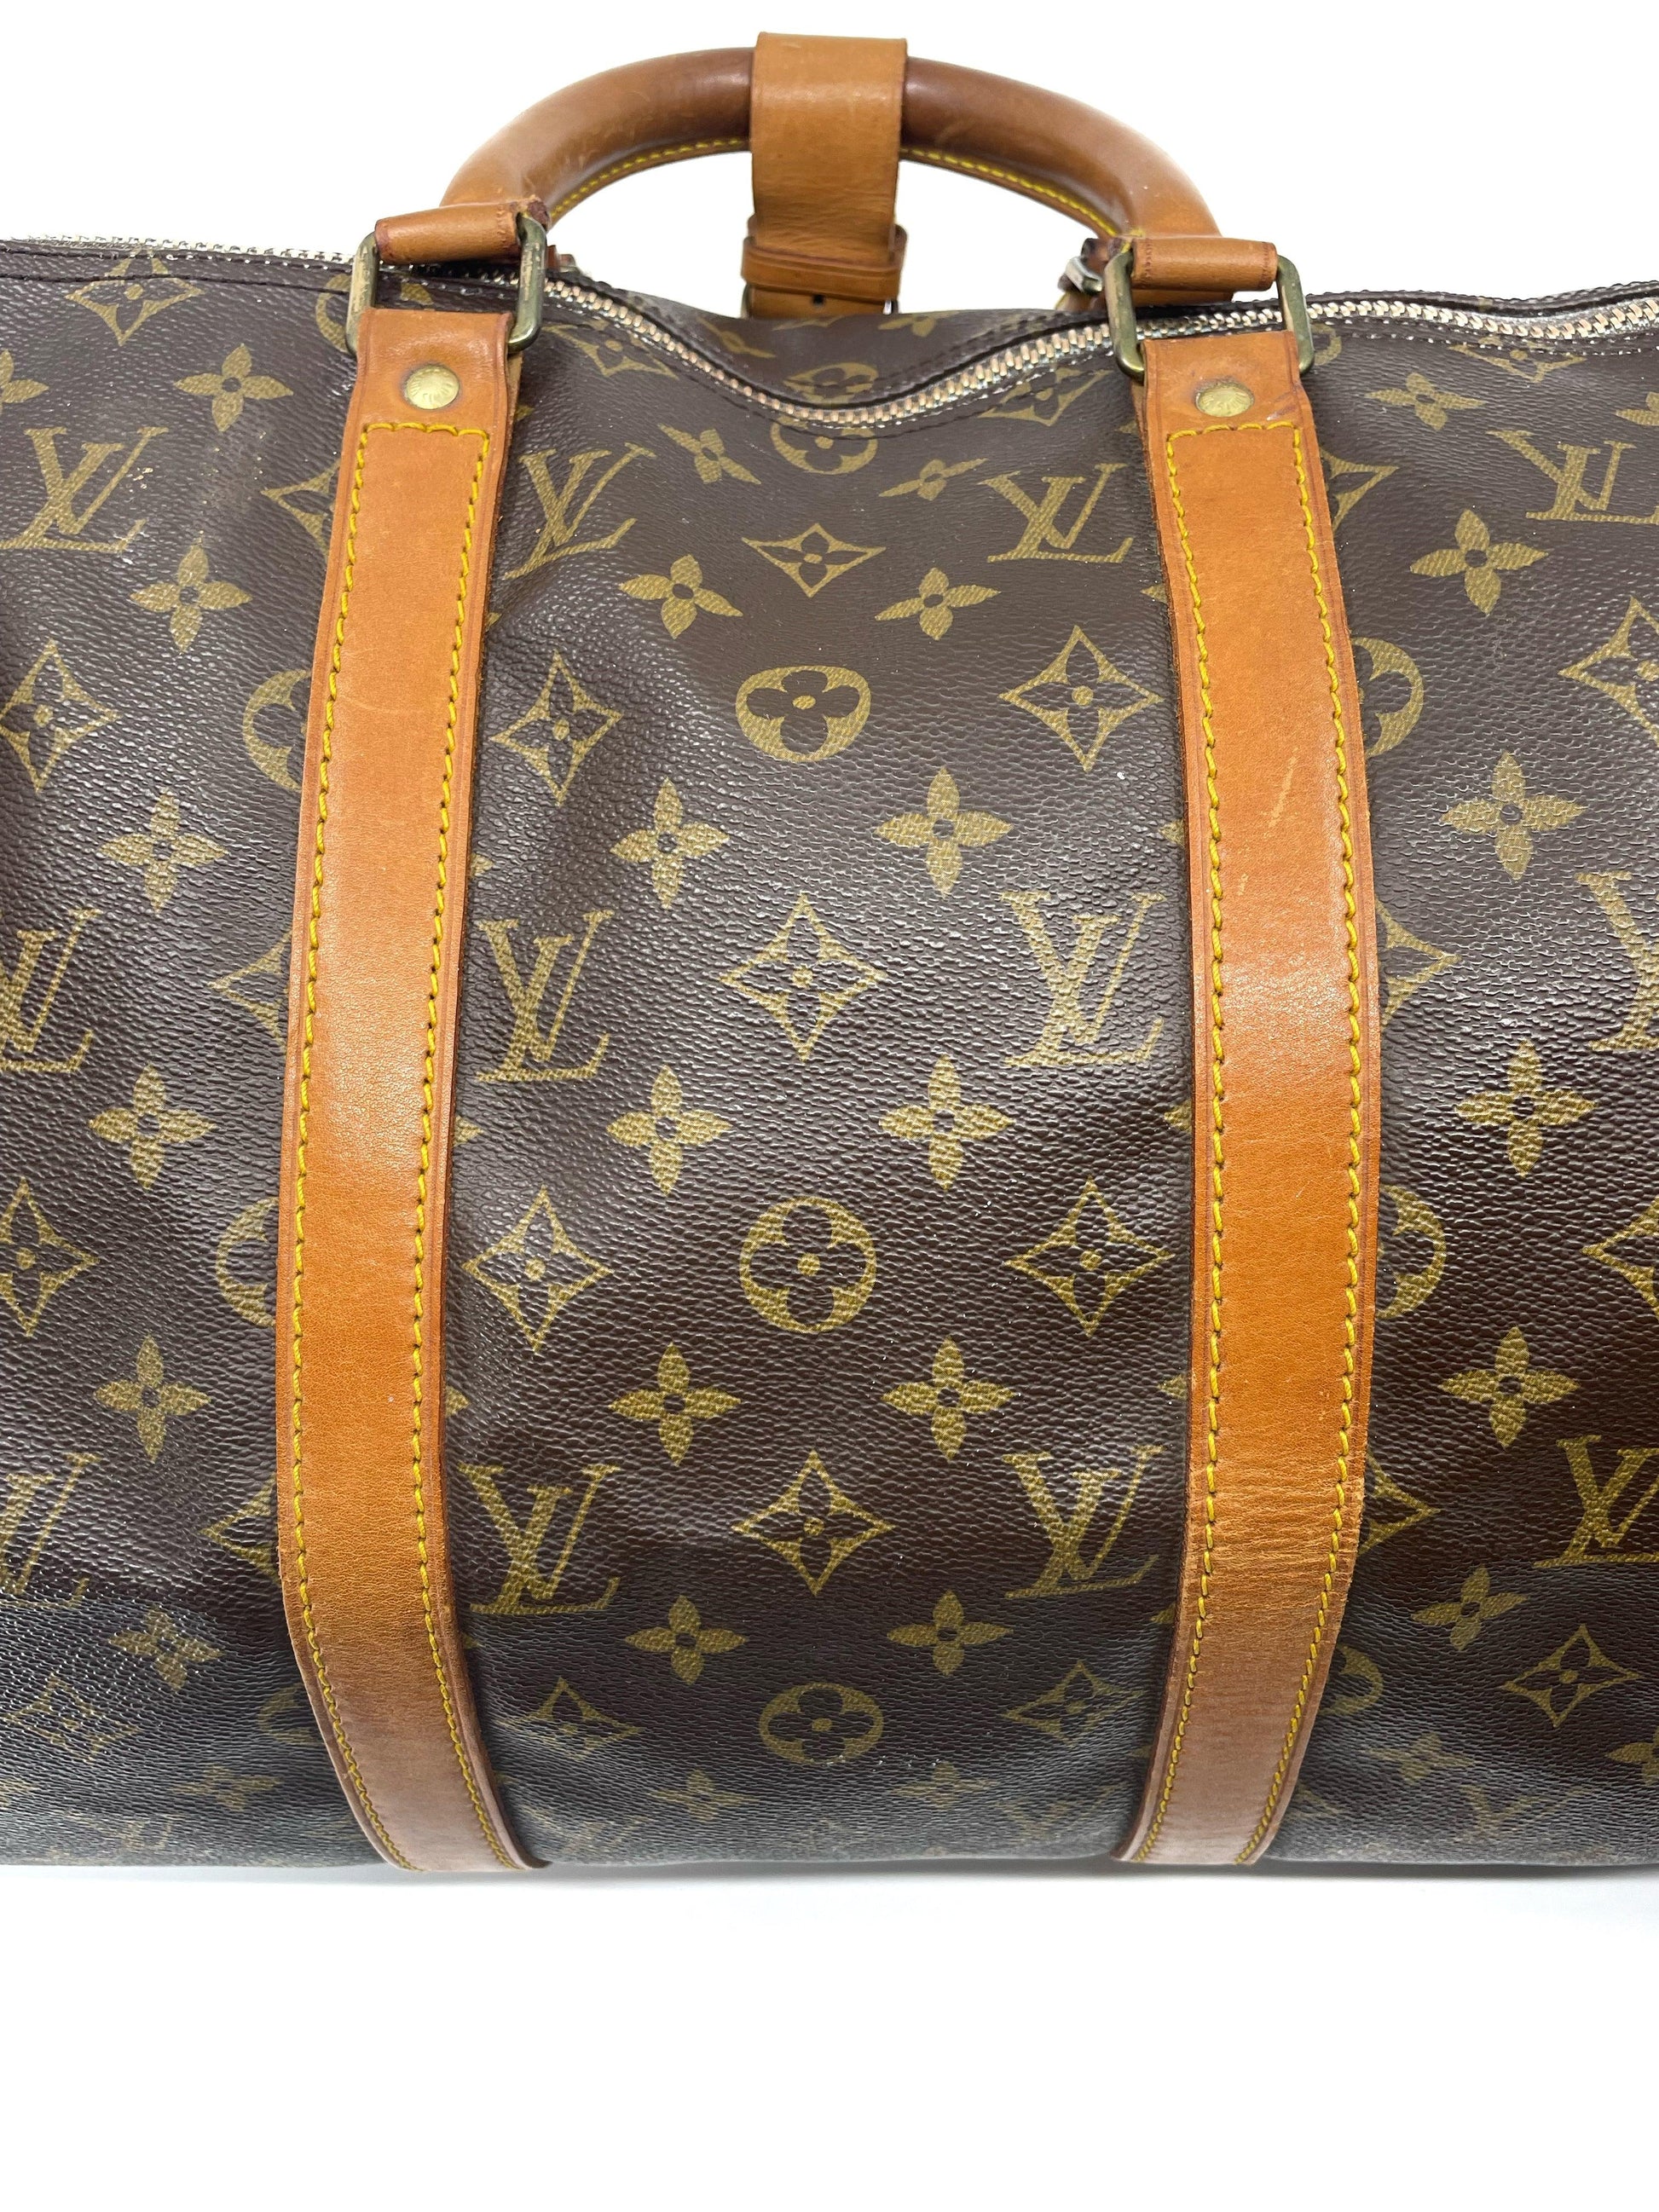 Is There Sales Tax On Louis Vuitton